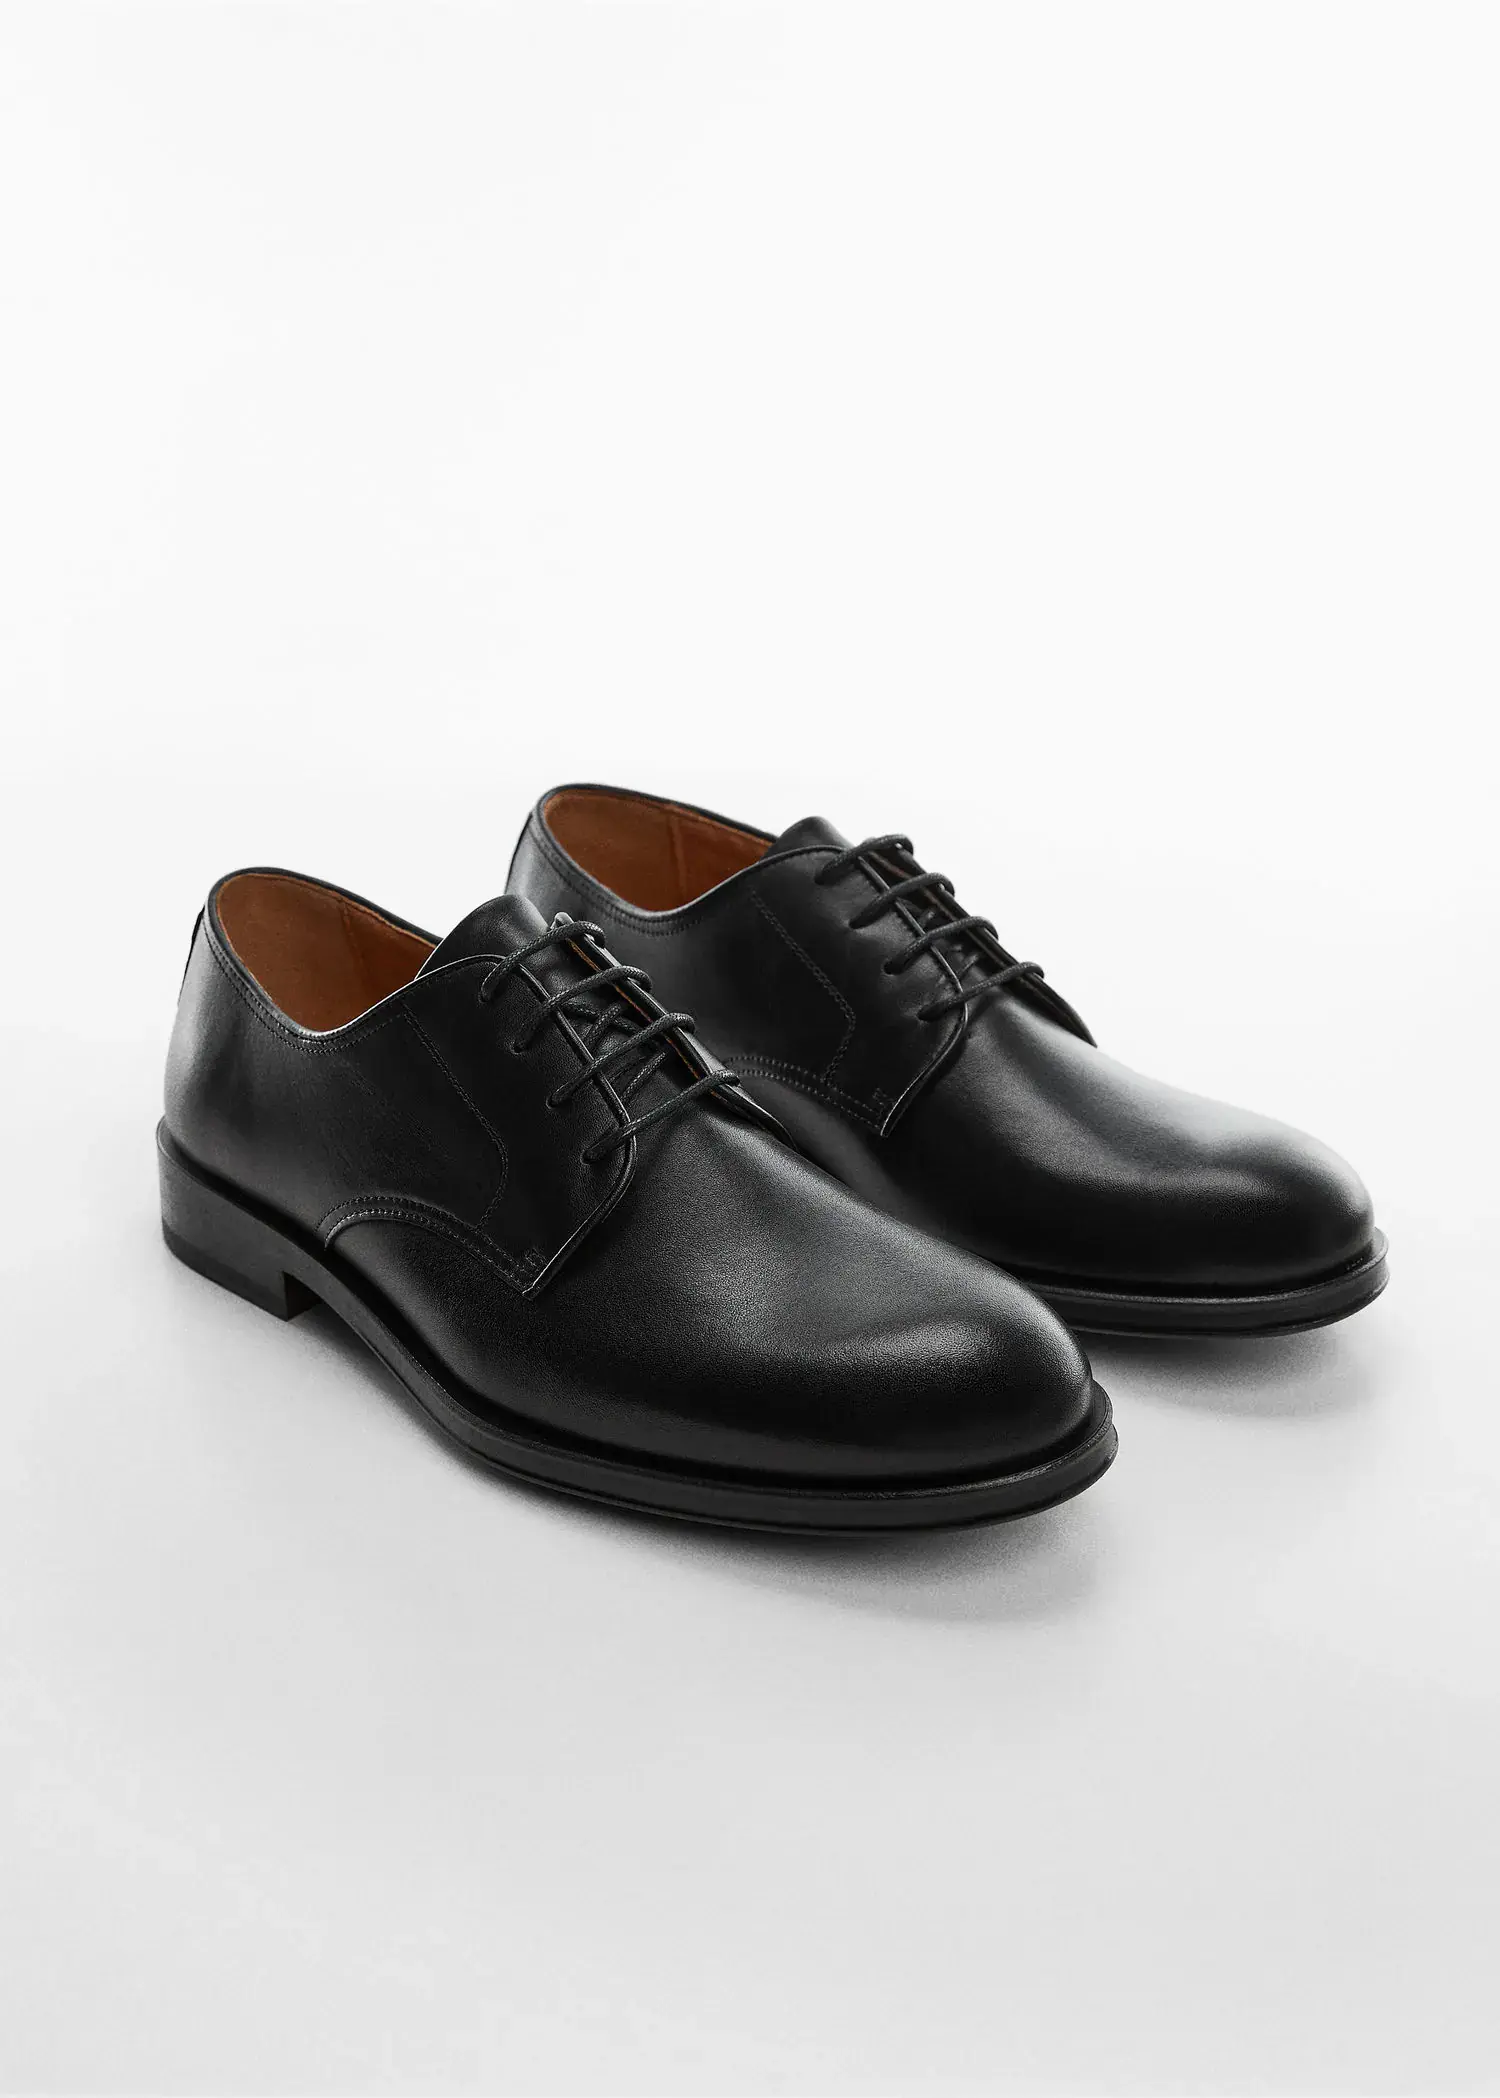 Mango Leather suit shoes. a pair of black shoes on a white surface. 